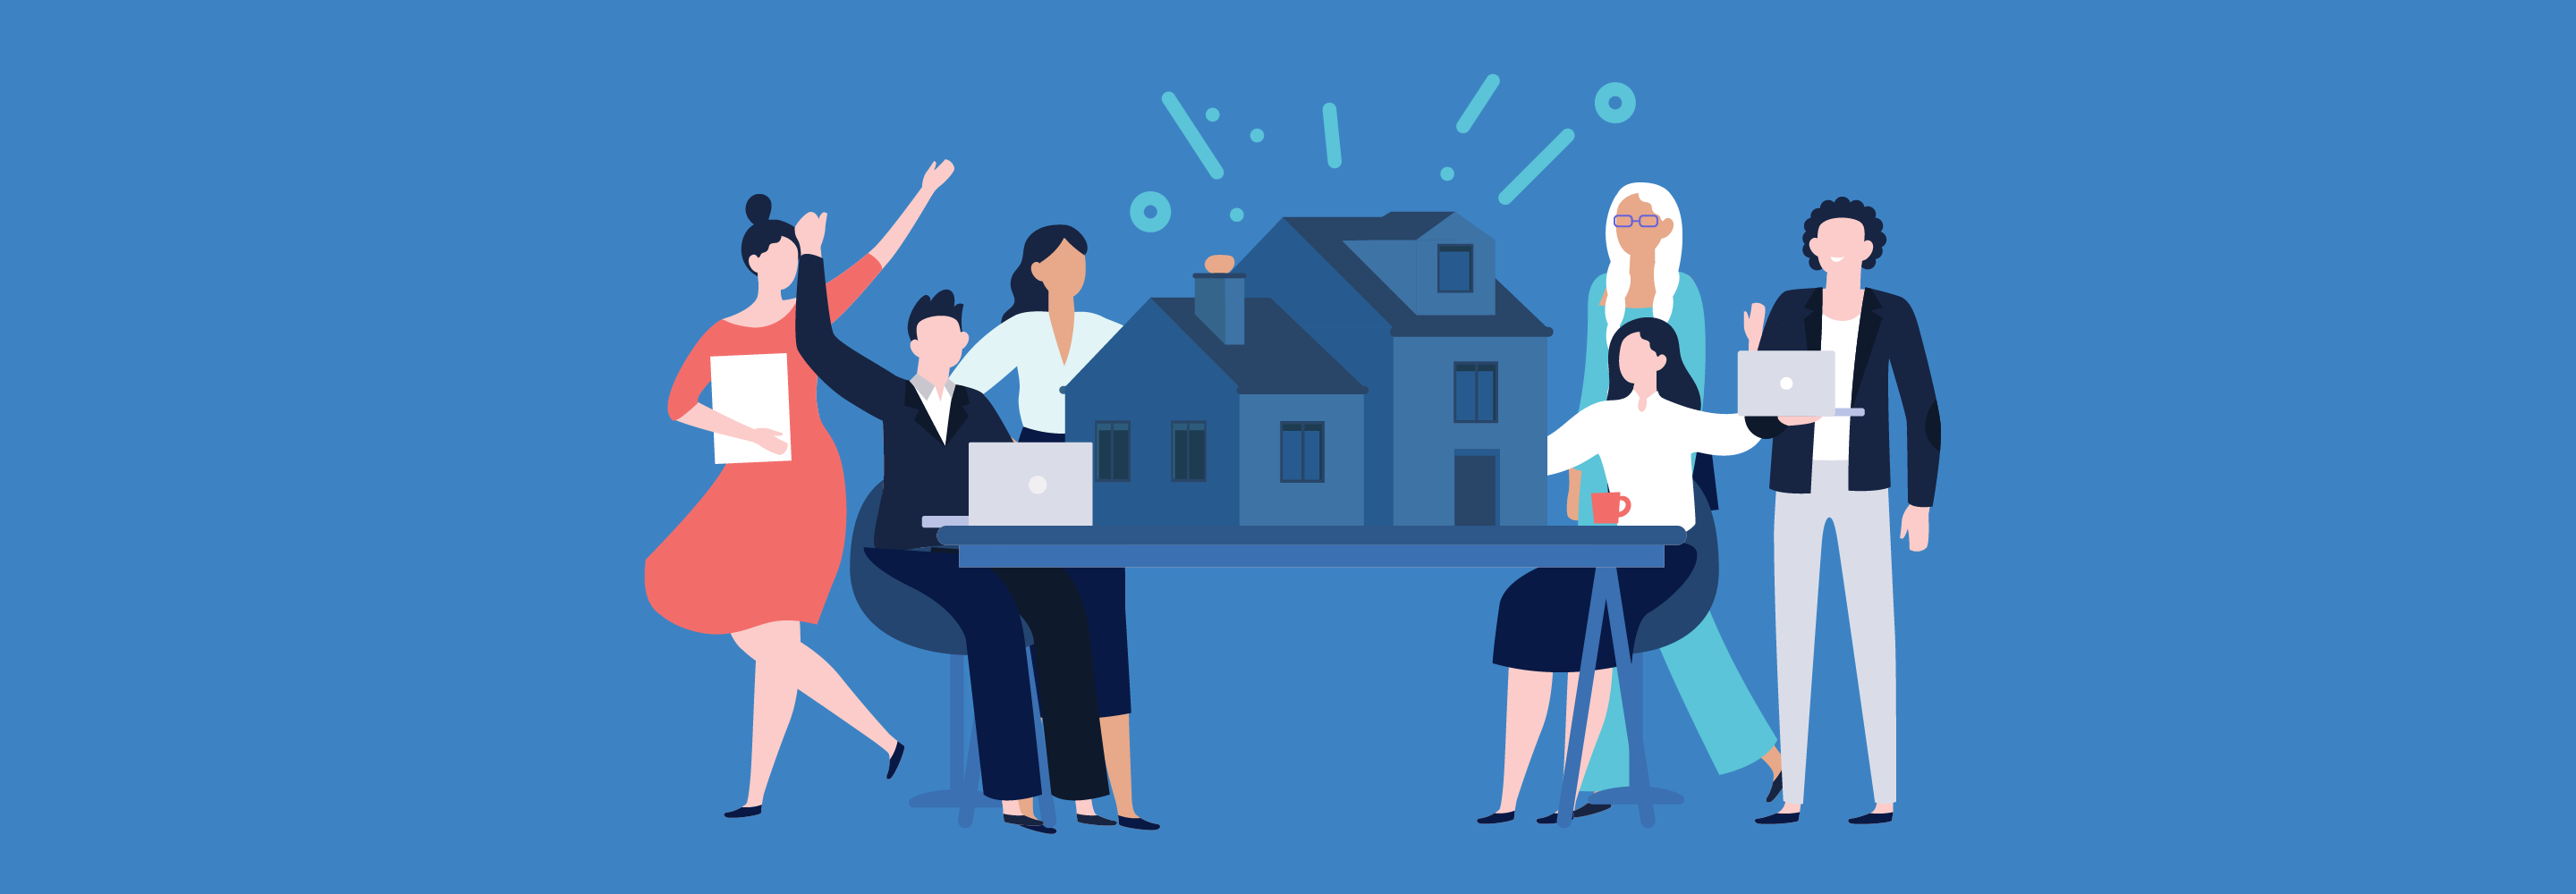 What Makes Real Estate Teams Tick